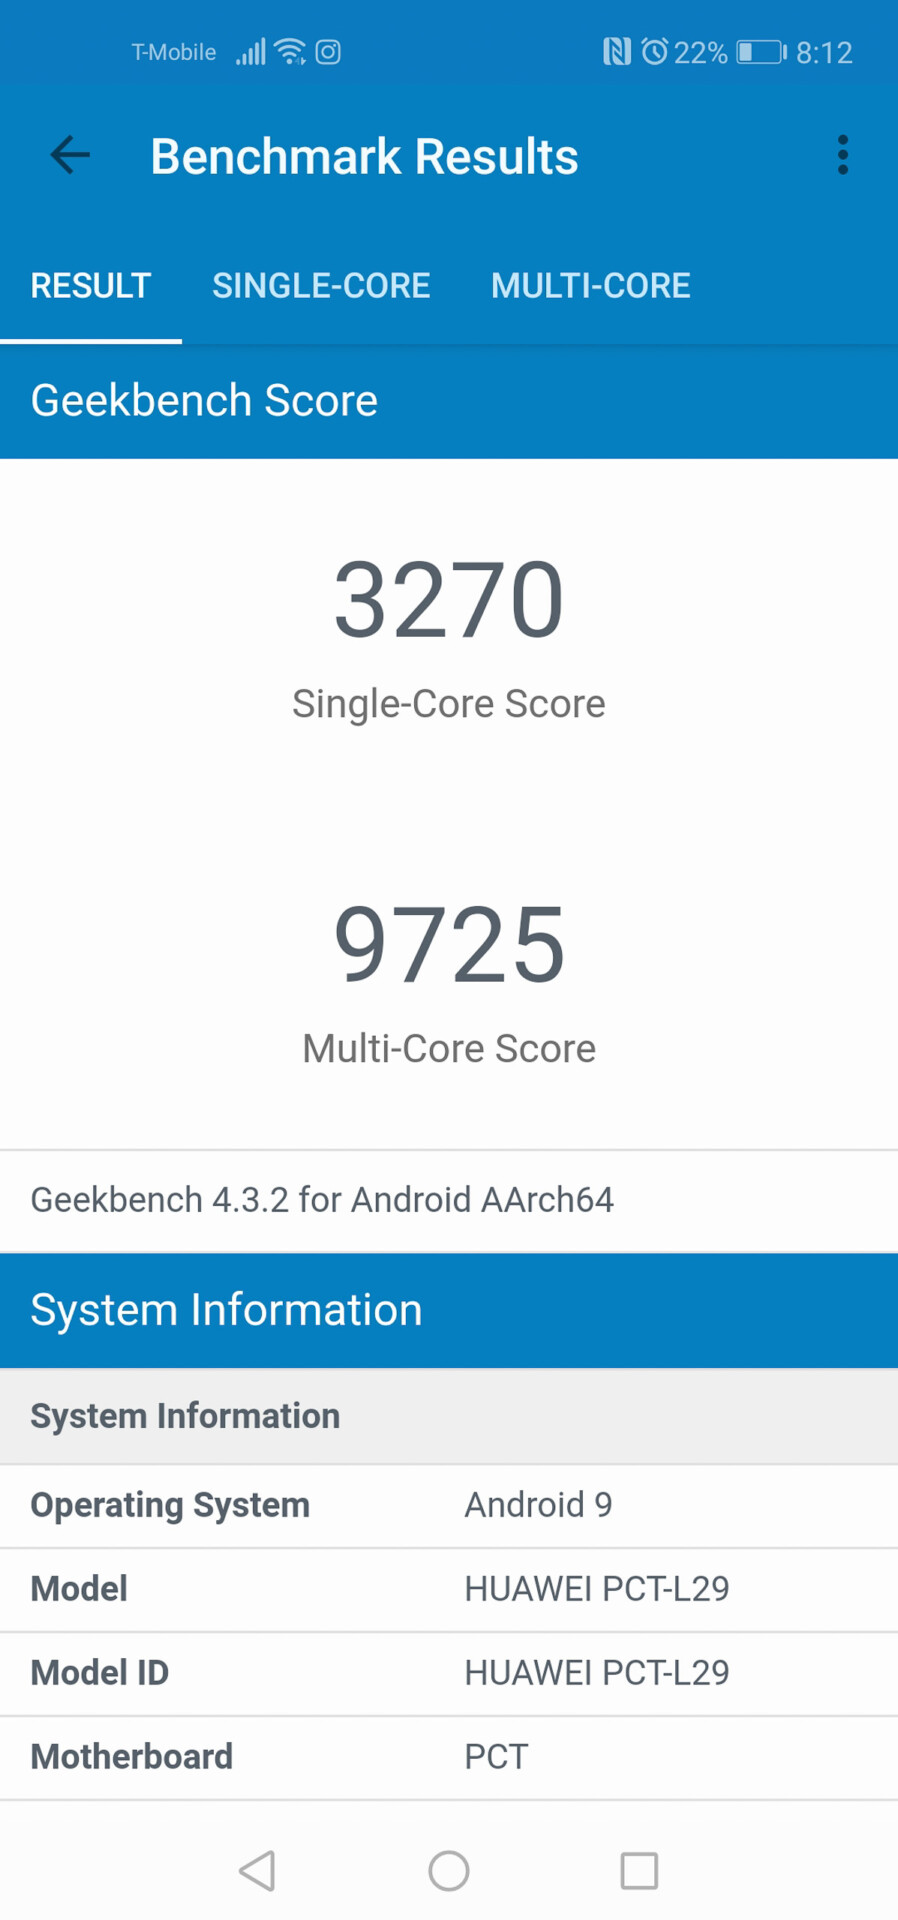 Honor View 20 benchmark results